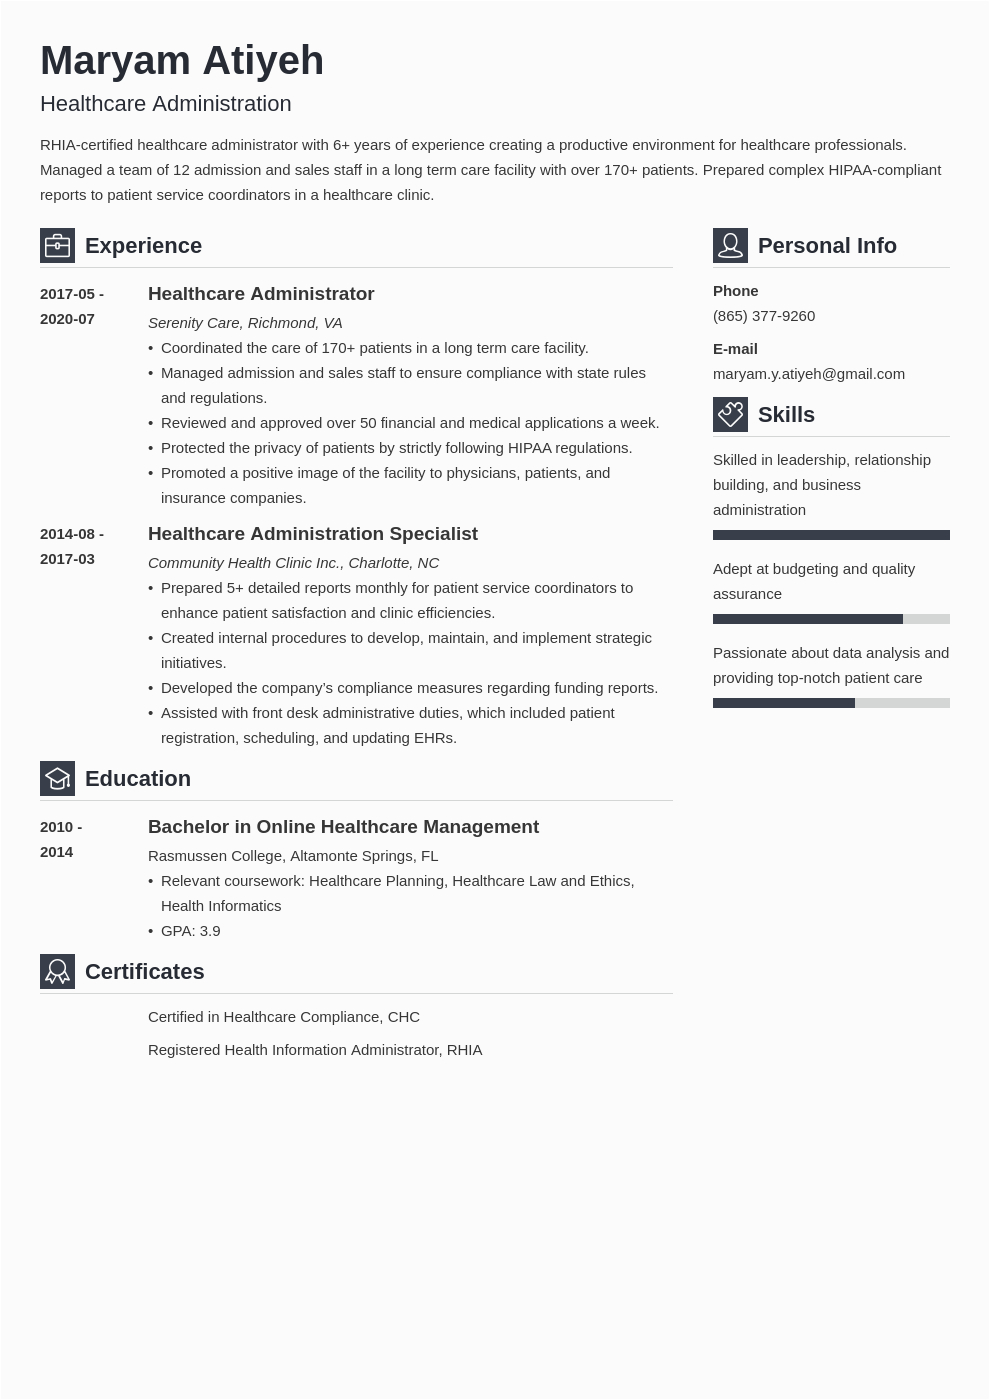 Free Resume Templates for Healthcare Administration Healthcare Administration Resume Samples and Writing Guide